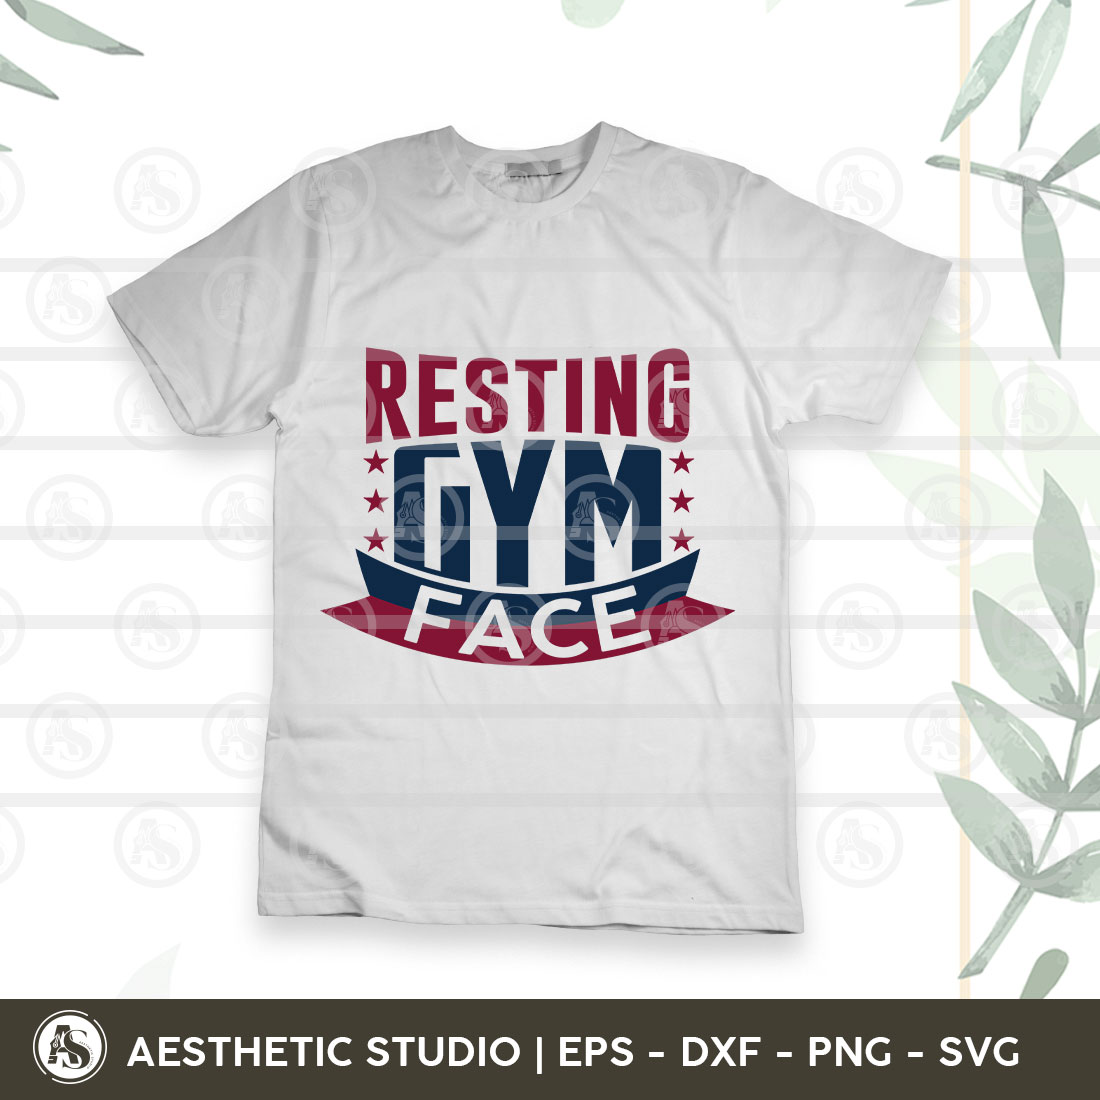 Gym Svg, Resting Gym Face Svg, Gym Cricut, Workout, Fitness, Gym Tshirt Svg, Gym Png Cut Files, Dxf, Svg, Eps preview image.